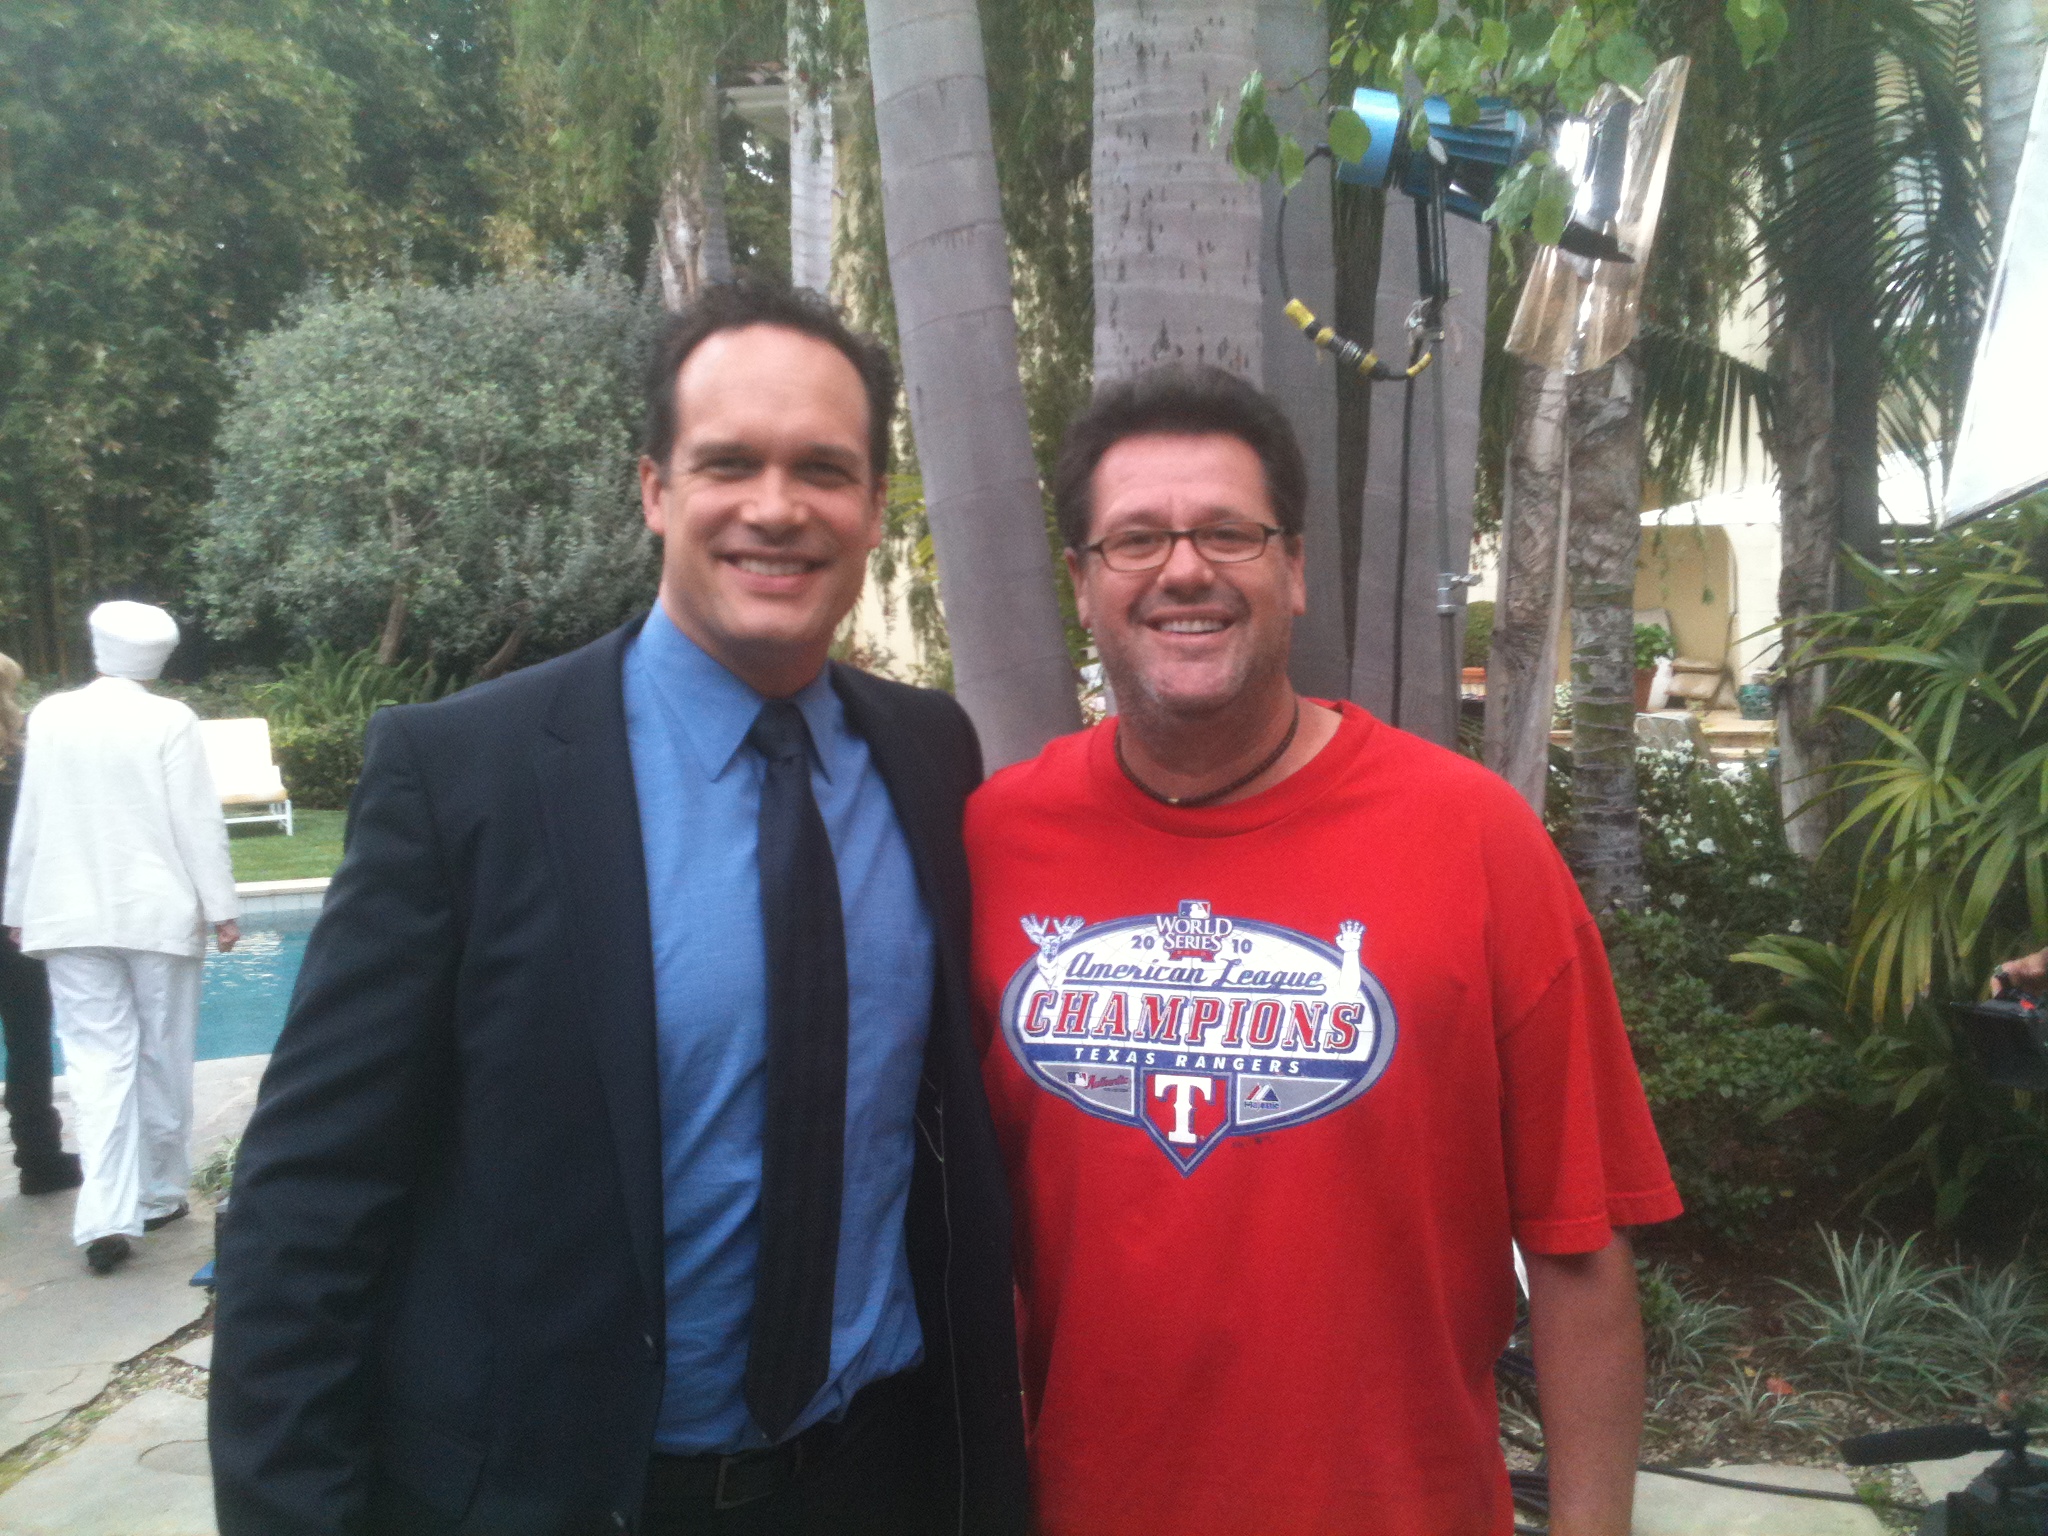 Mr. Diedrich Bader and I on the set of 